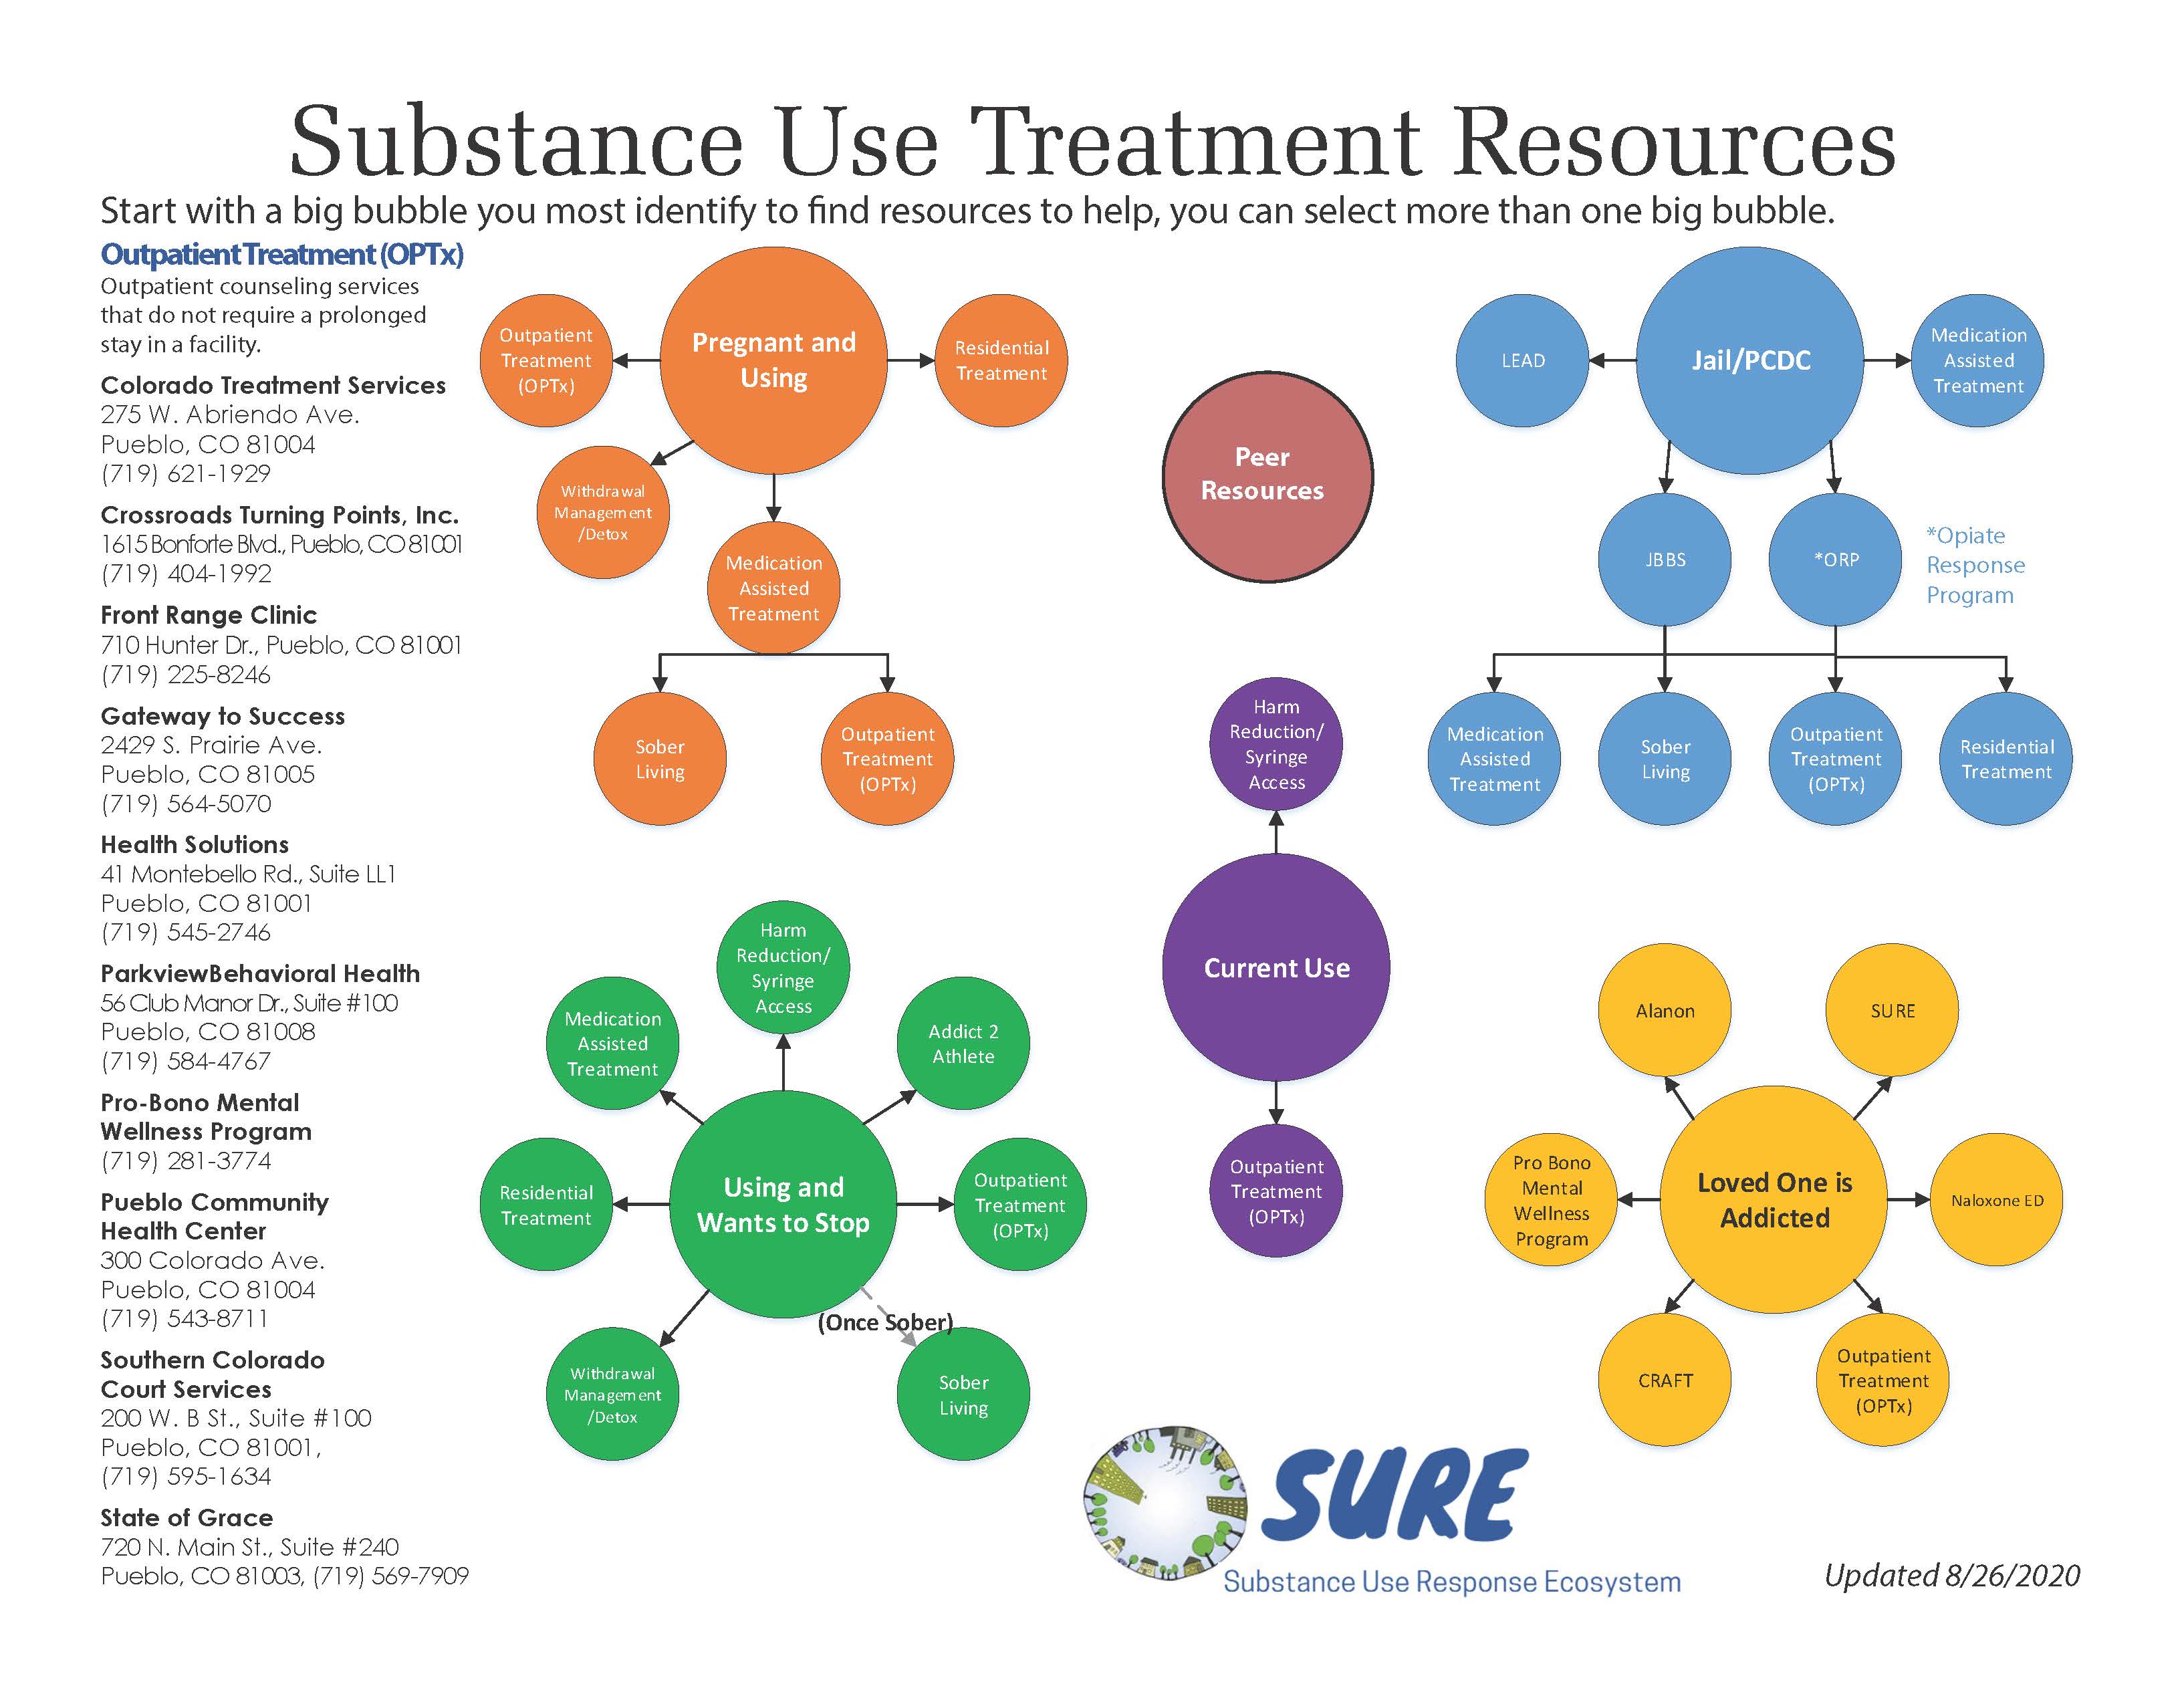 Substance Use Treatment Resources PDF Link